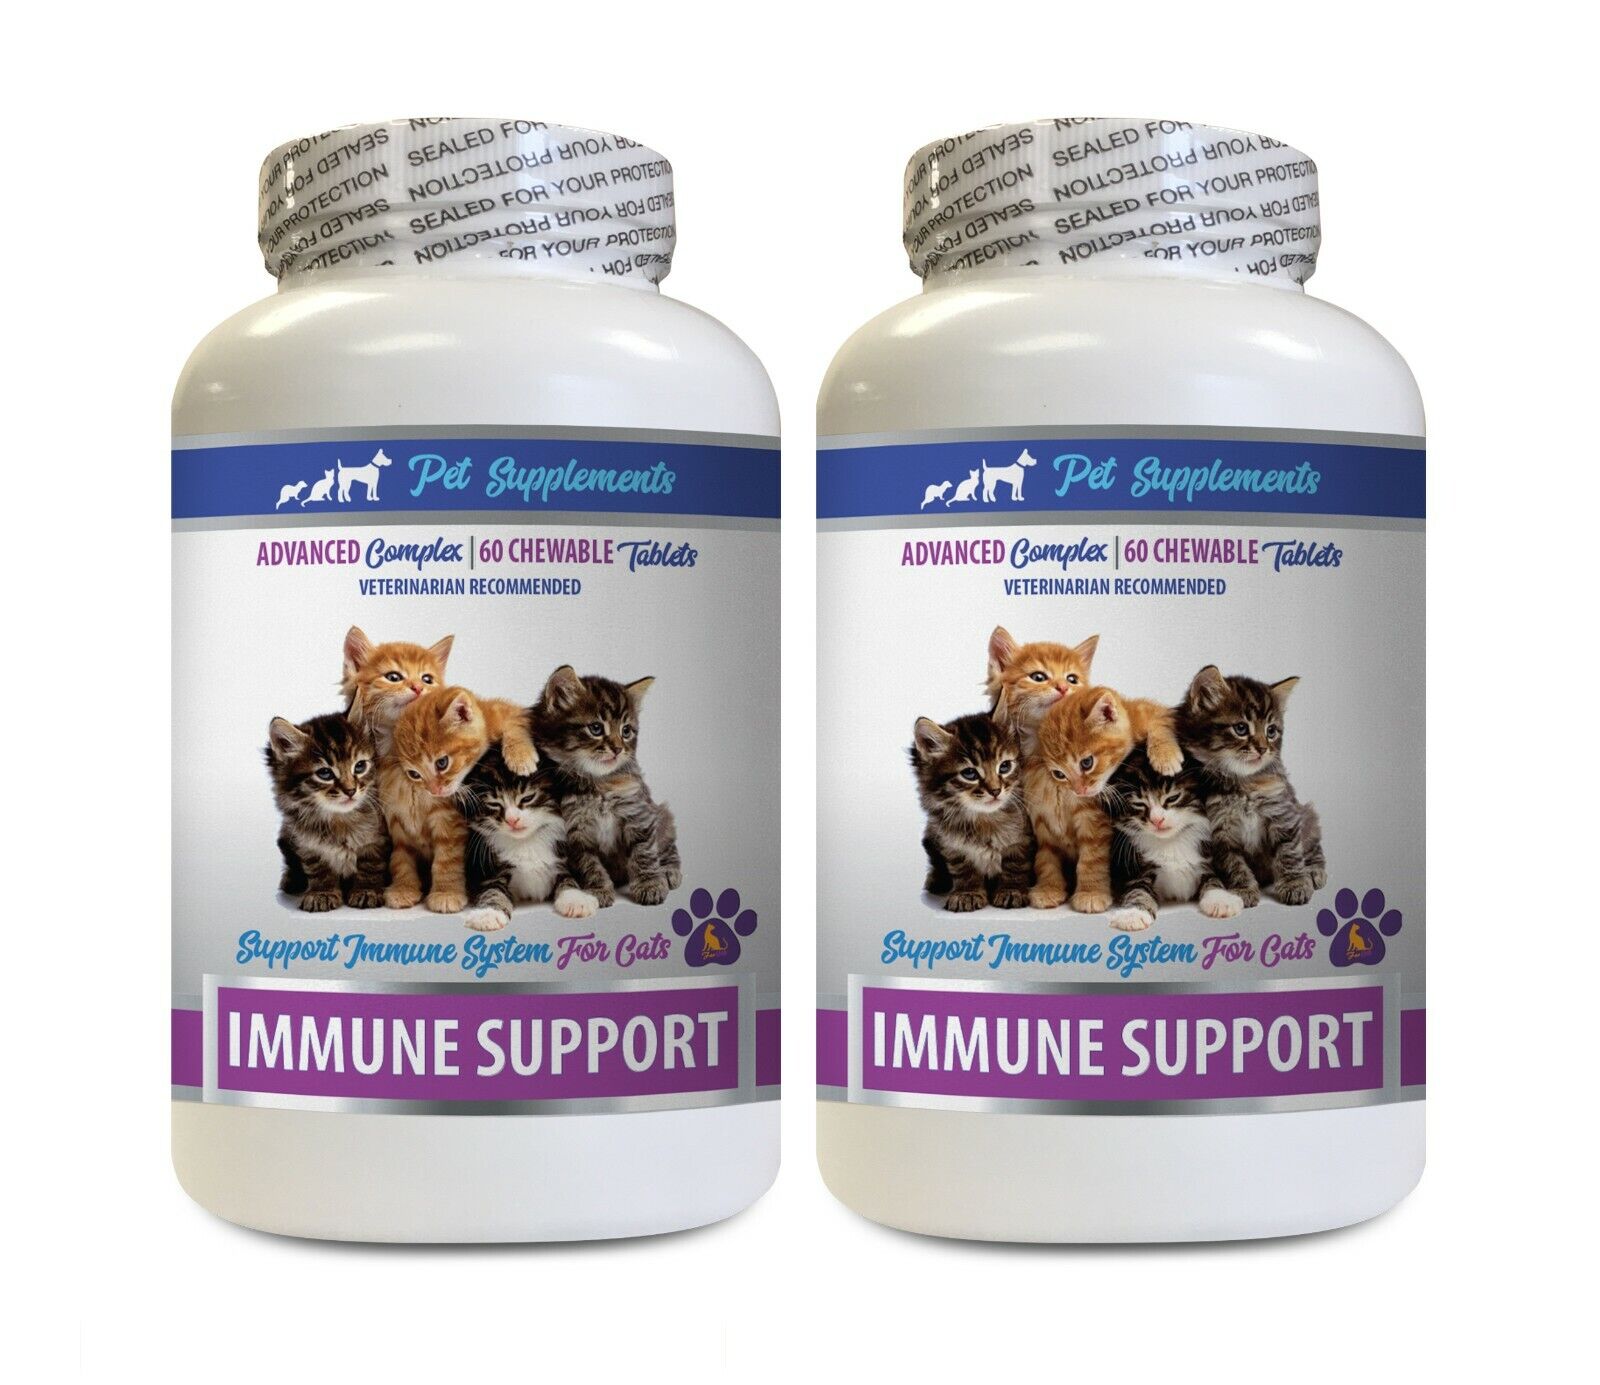 liver support for Credence cats - CAT IMMUNE 2B- BOOSTER Popular brand in the world turmer SUPPORT